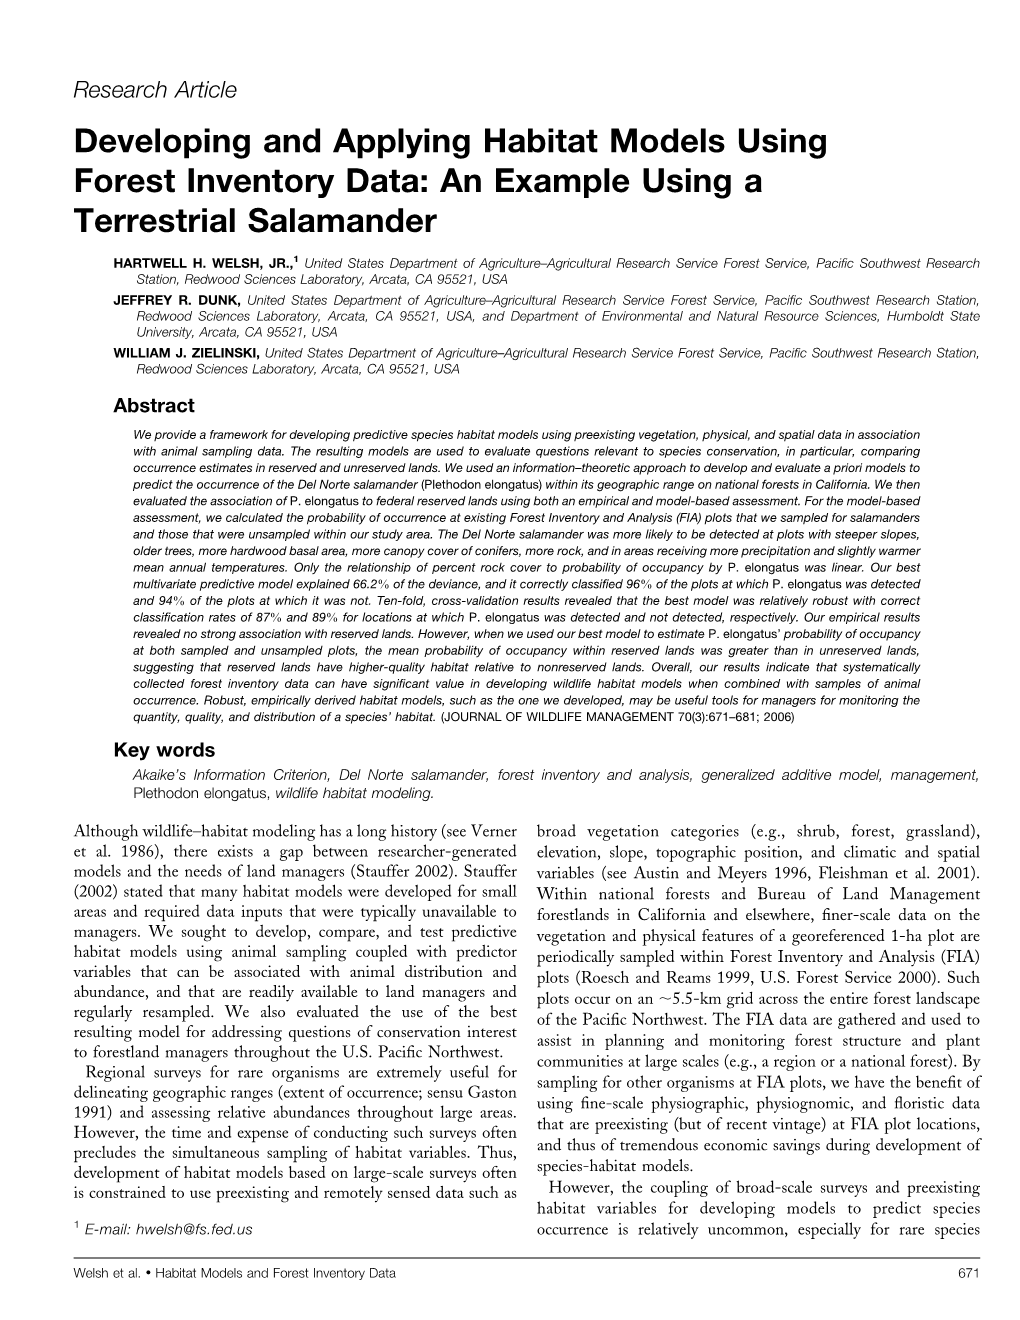 Developing and Applying Habitat Models Using Forest Inventory Data: an Example Using a Terrestrial Salamander